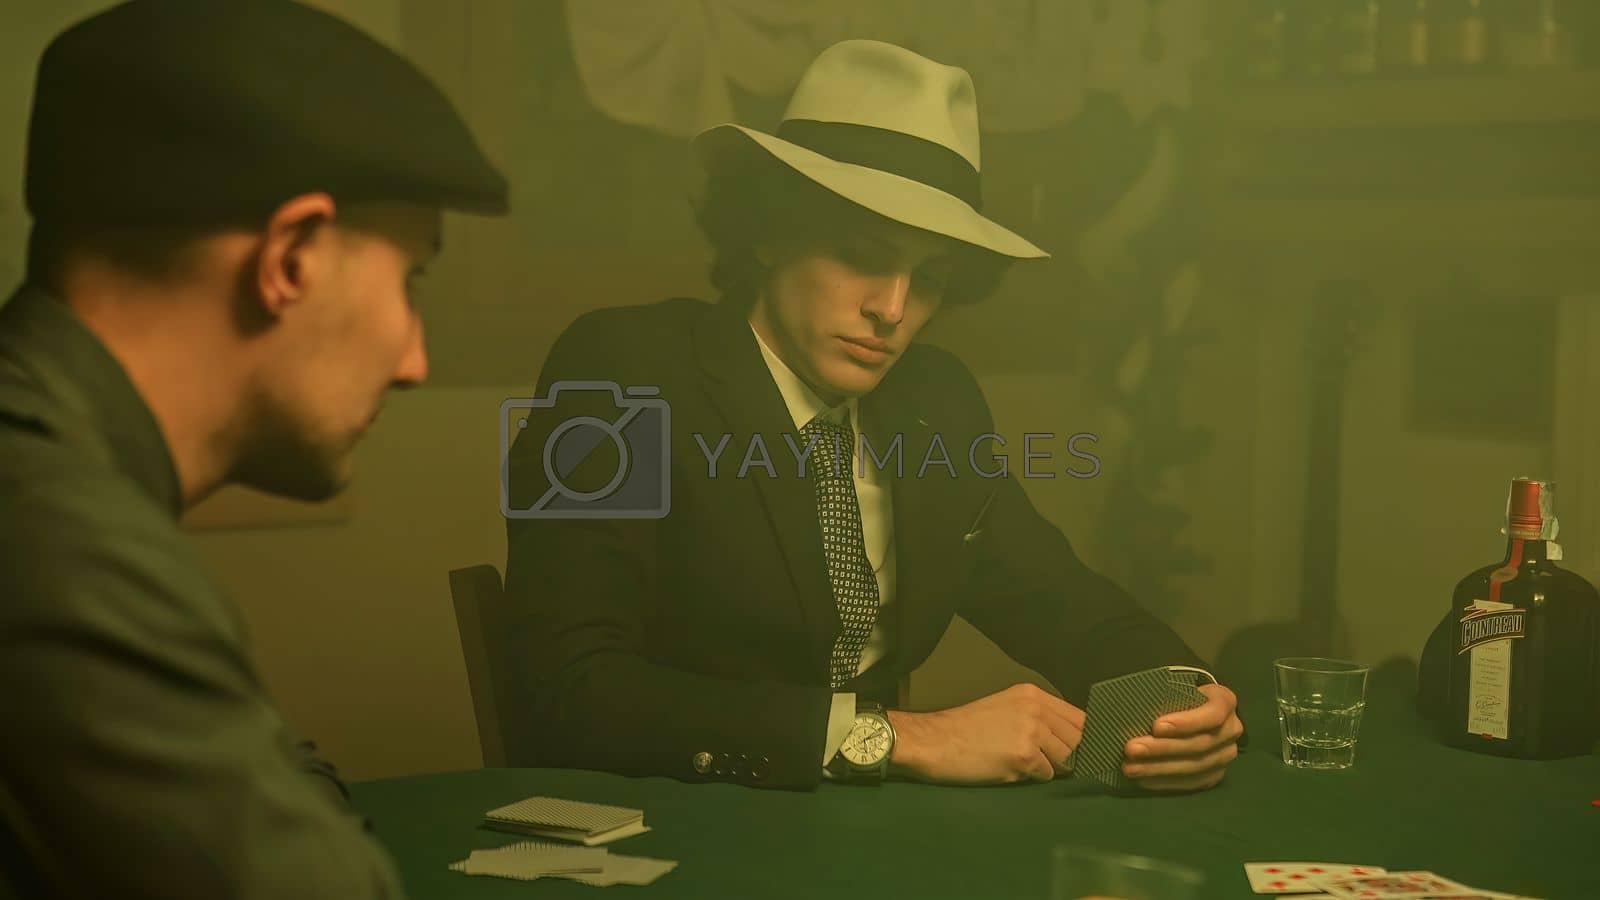 Royalty free image of A defeated poker player stares down at his cards and drops them on the table by pippocarlot